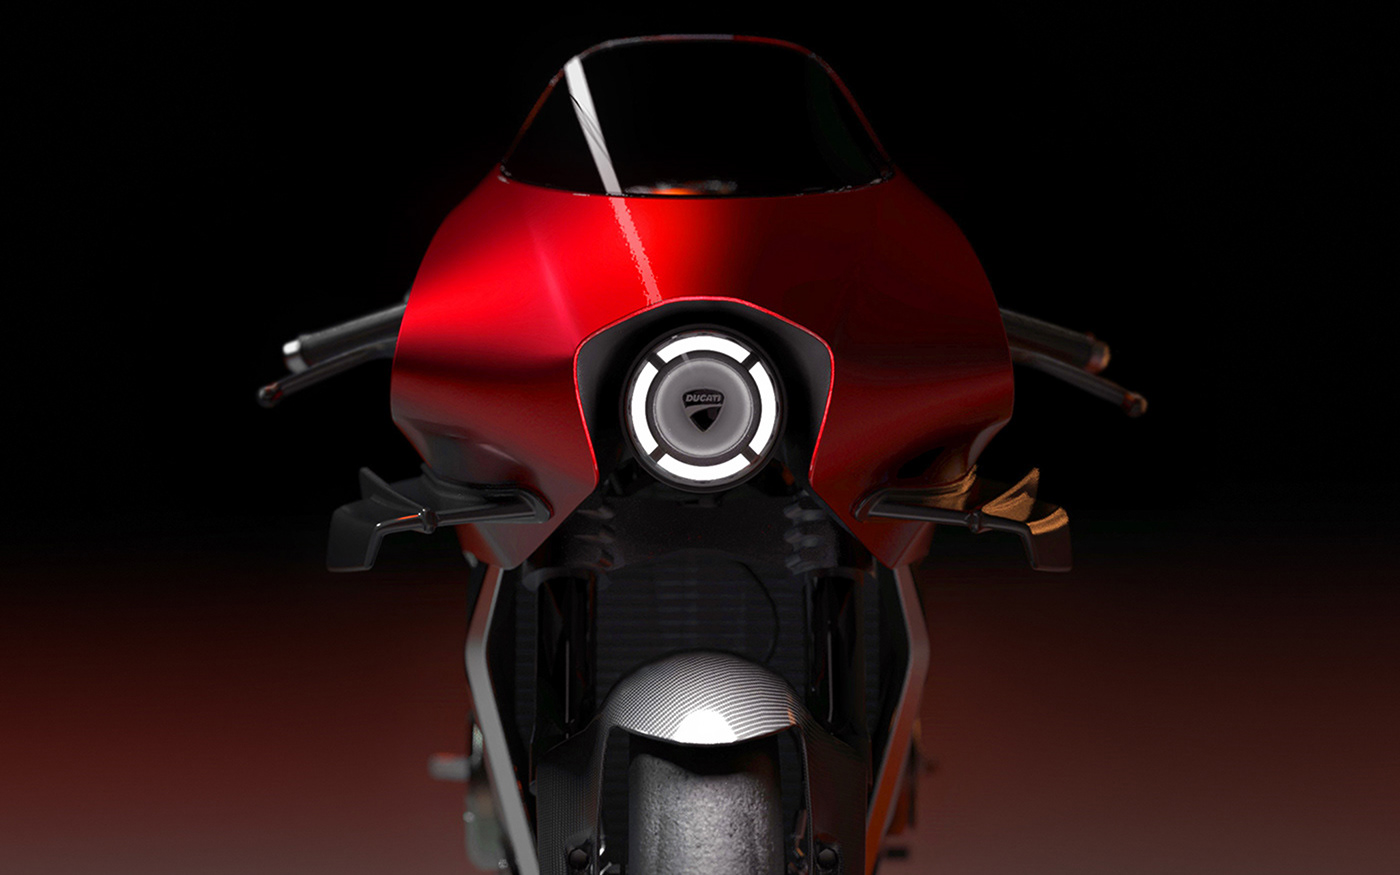 design Ducati ducatidesign ducatimotorcycles MH900 motorcycle panigale rostm Streetfighter v4